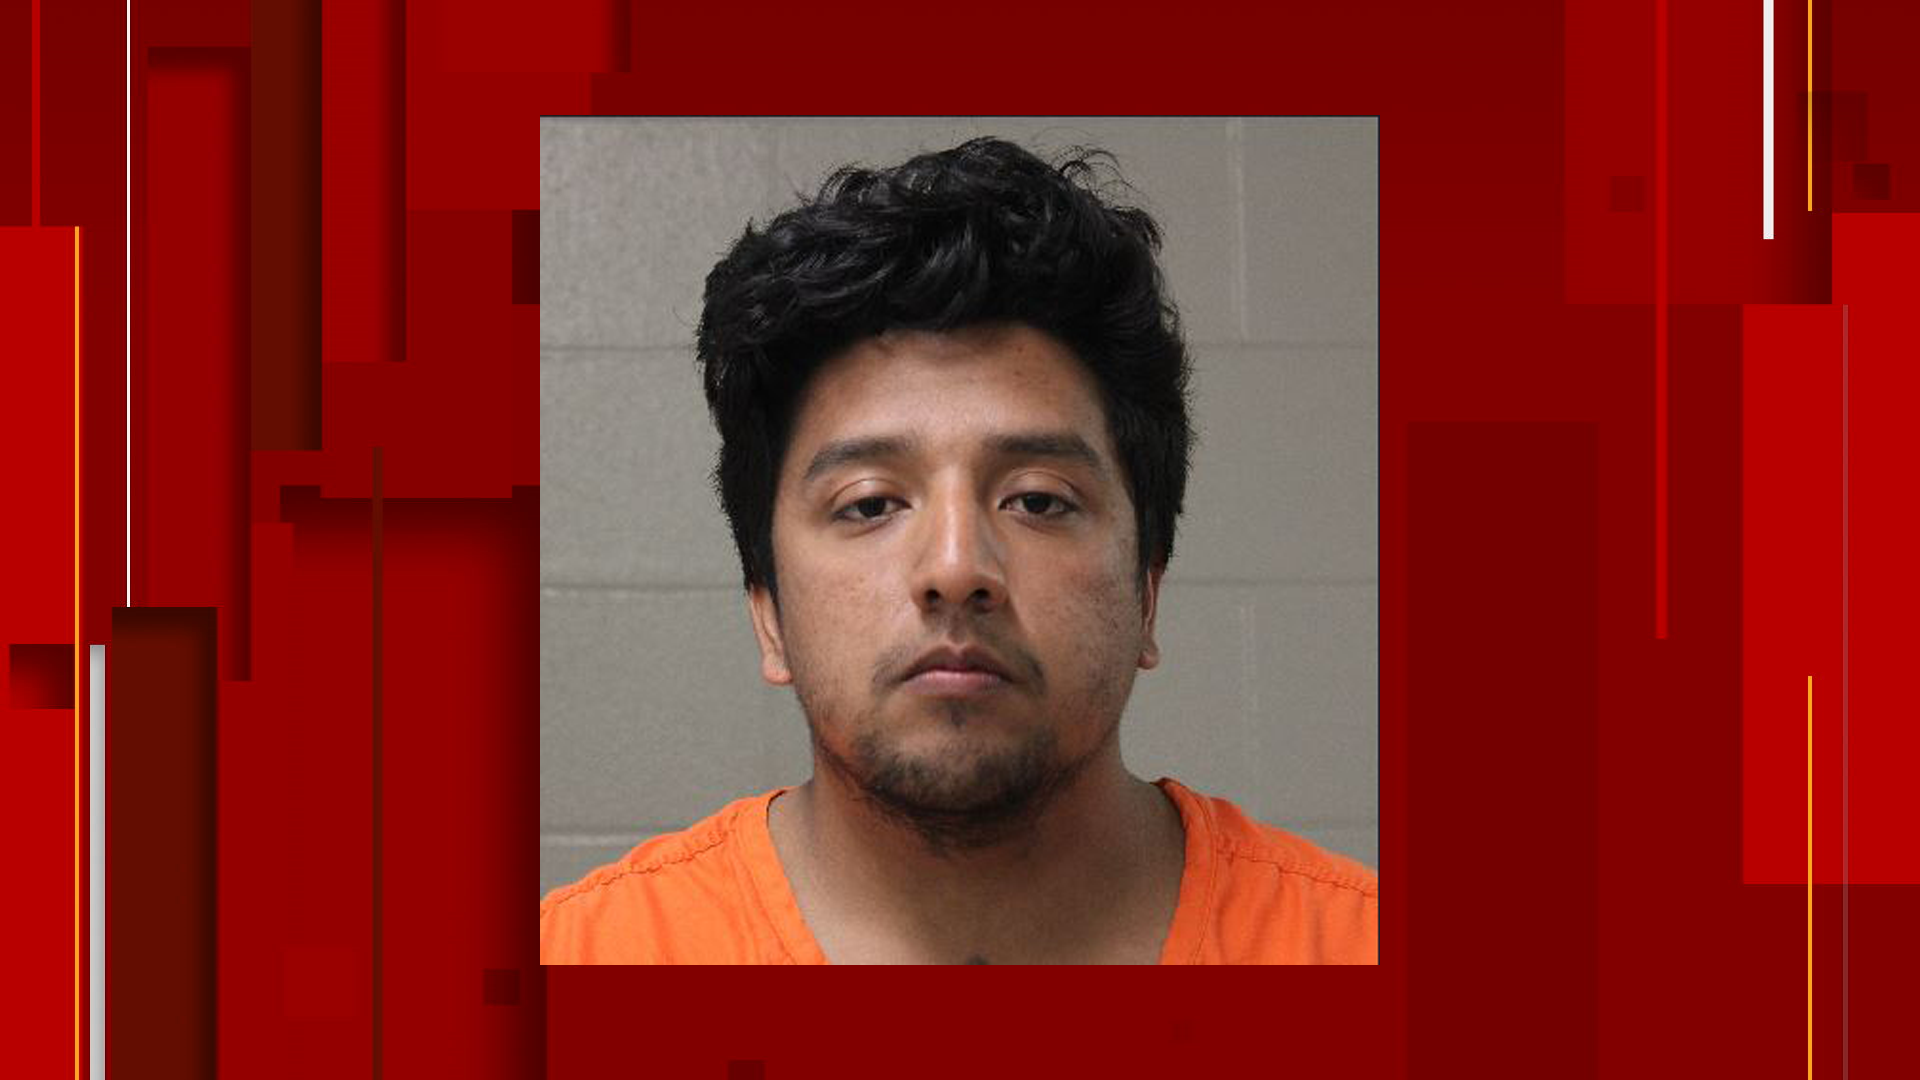 Hondo man arrested in connection with death of his 1-month-old baby